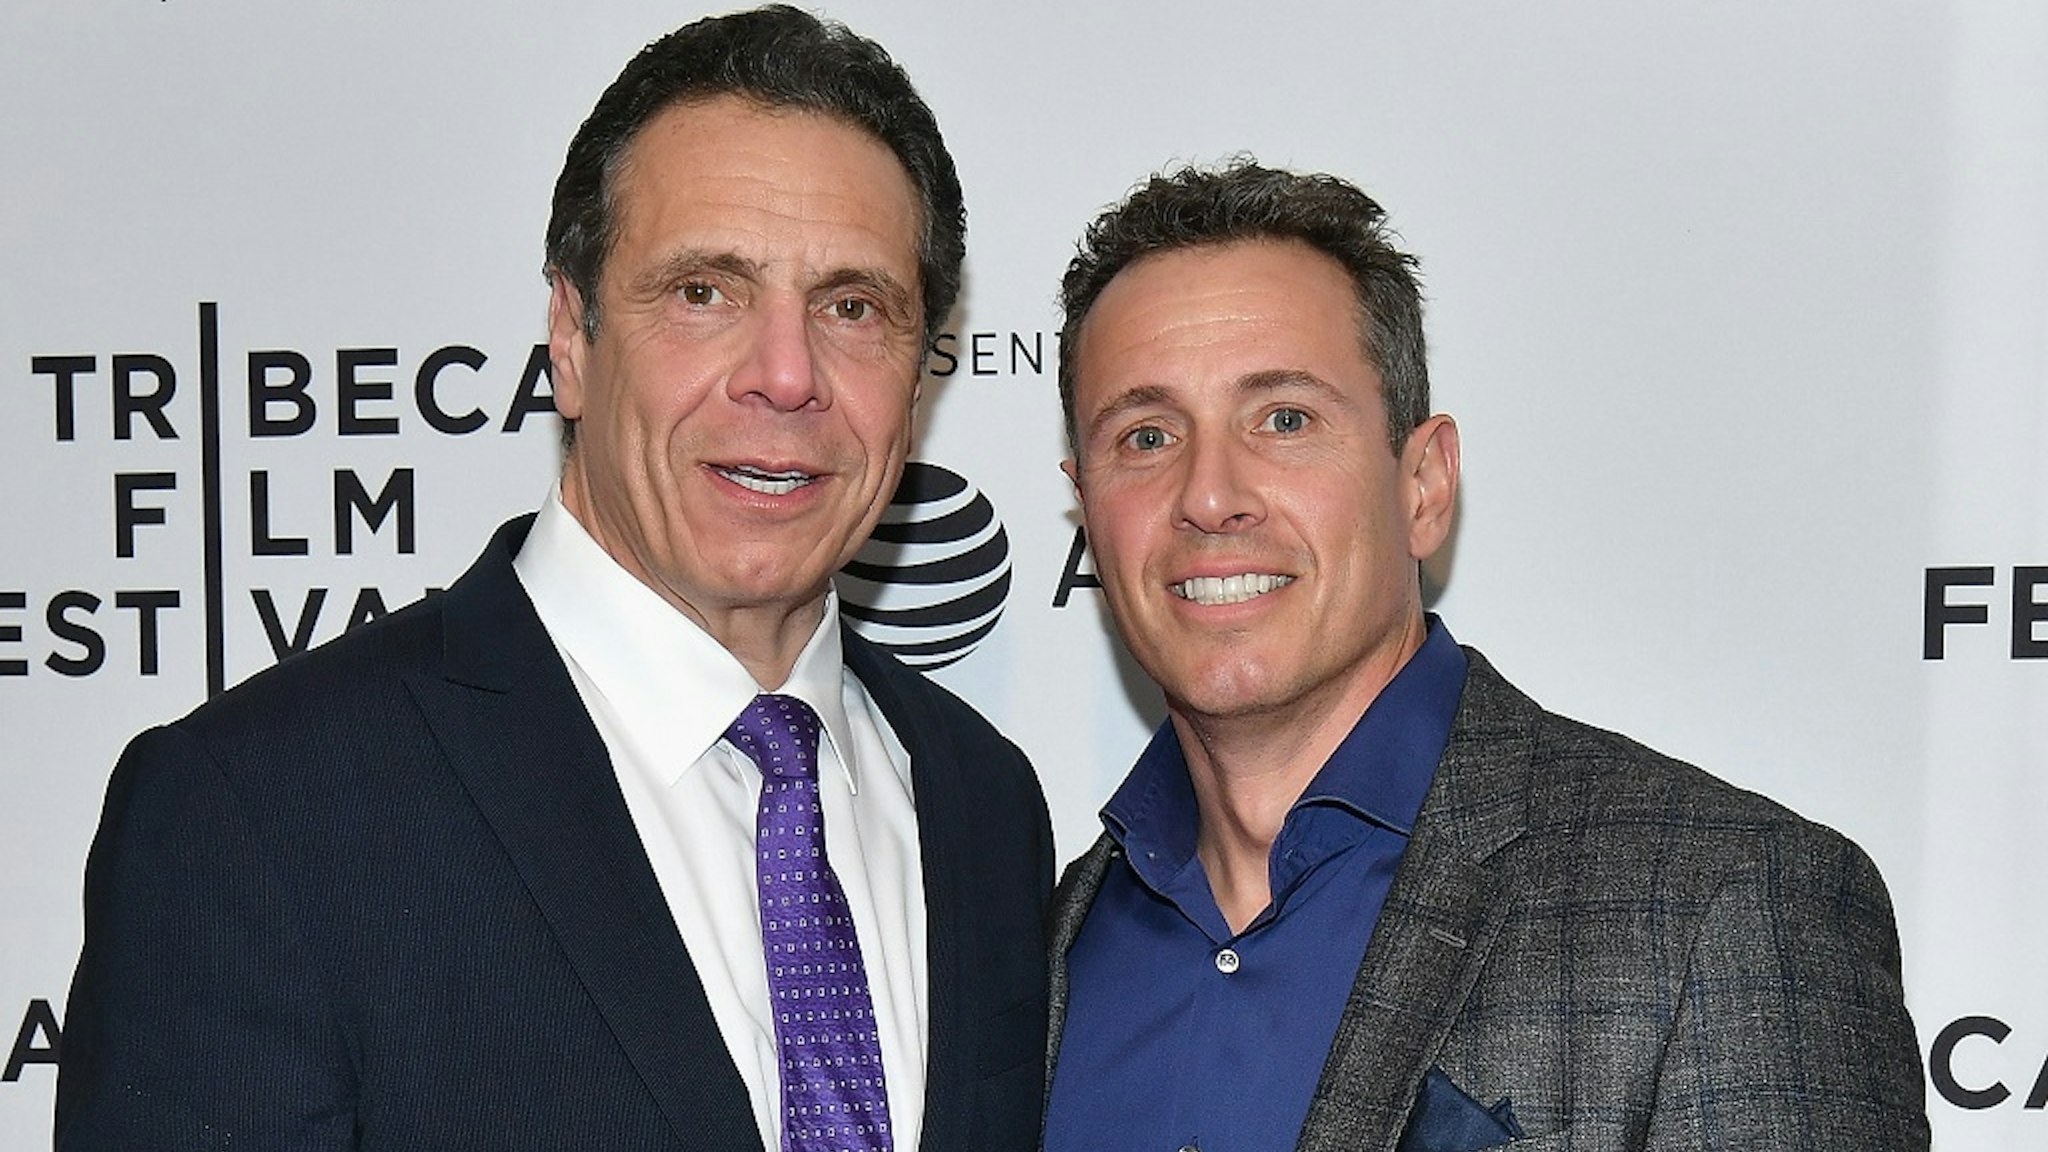 NEW YORK, NY - APRIL 26: Governor of New York Andrew Cuomo and Chris Cuomo attend a screening of "RX: Early Detection A Cancer Journey With Sandra Lee" during the 2018 Tribeca Film Festiva at SVA Theatre on April 26, 2018 in New York City.